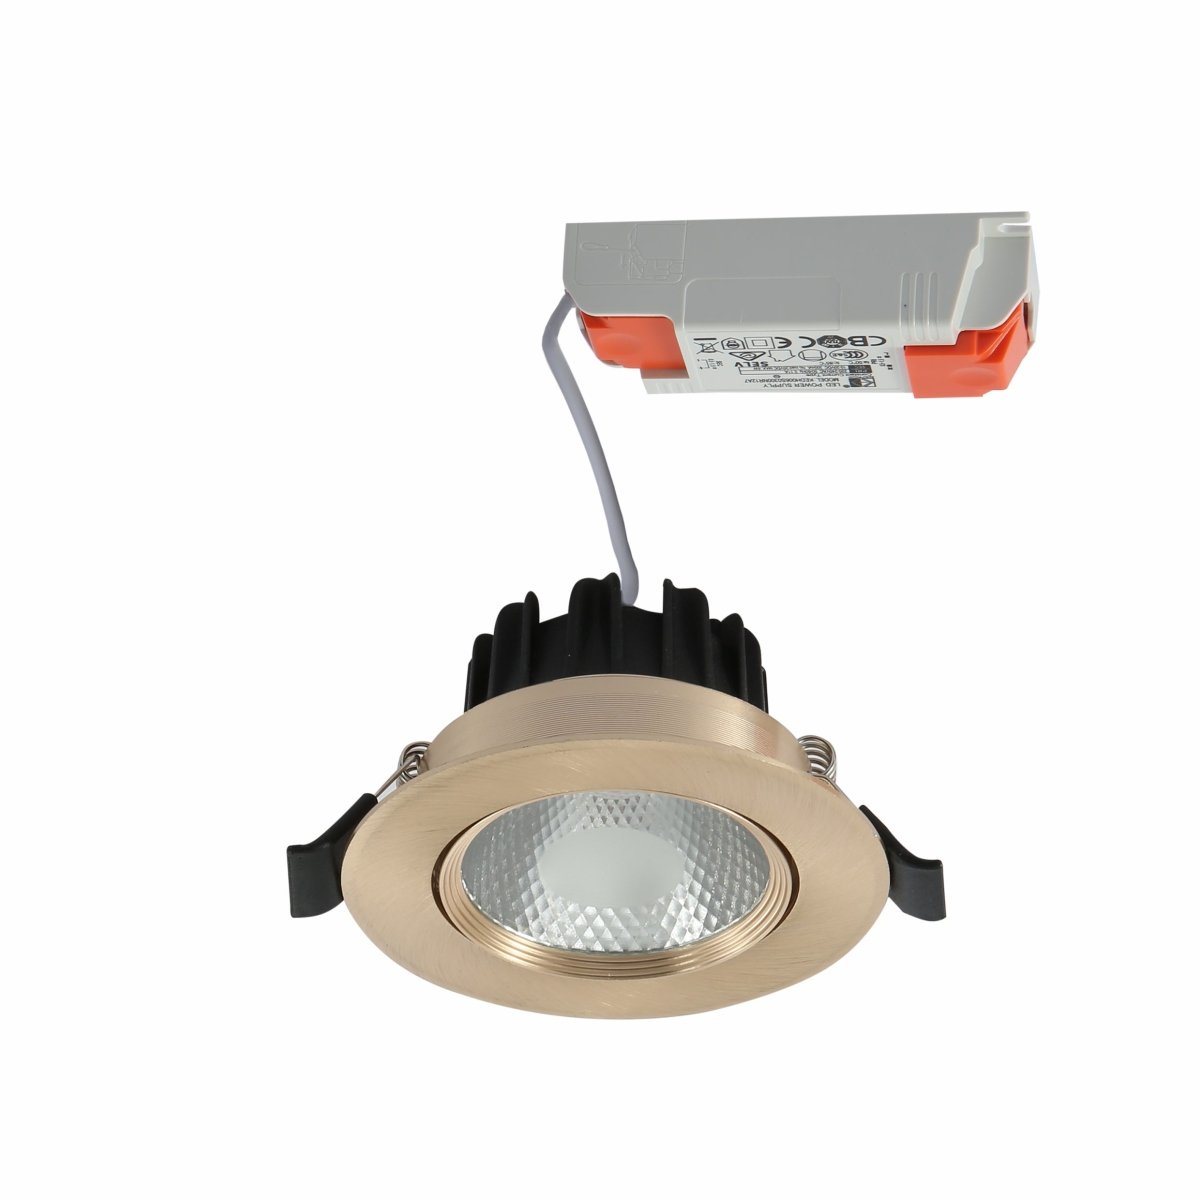 Main image of LED COB Recessed Downlight 5W Cool White 4000K Antique Brass | TEKLED 145-03070